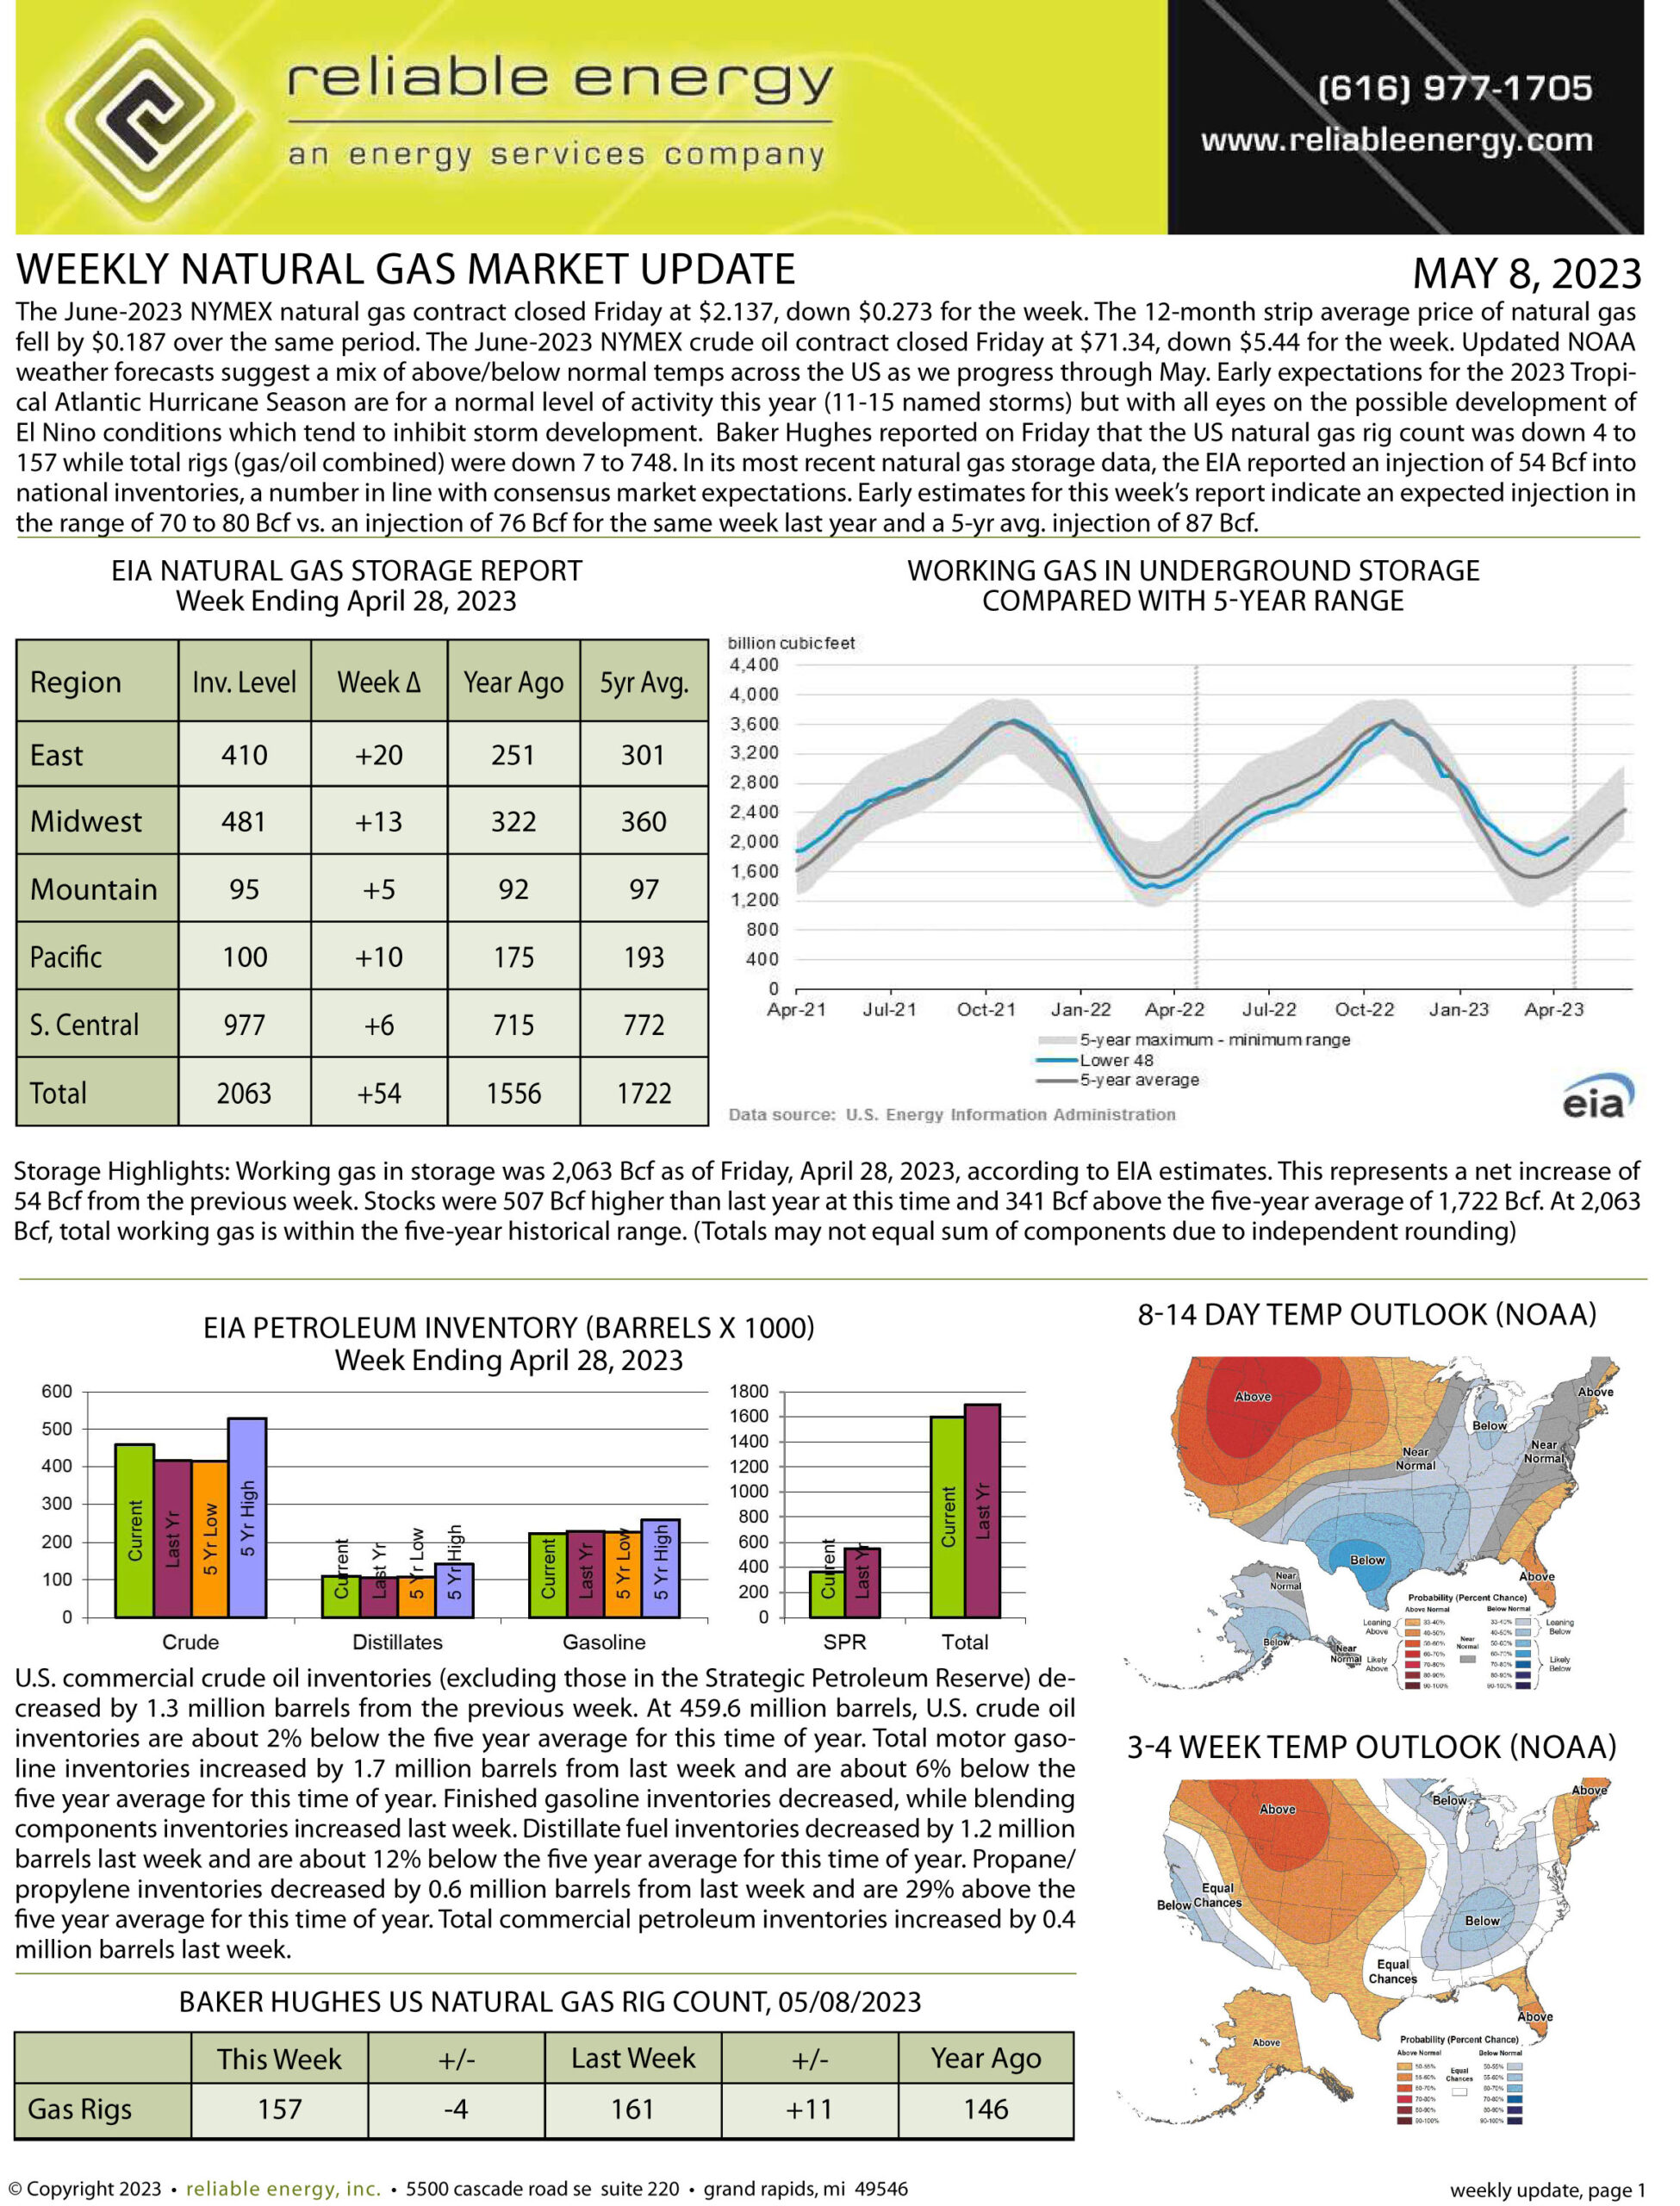 Natural Gas Market Update – May 8, 2023